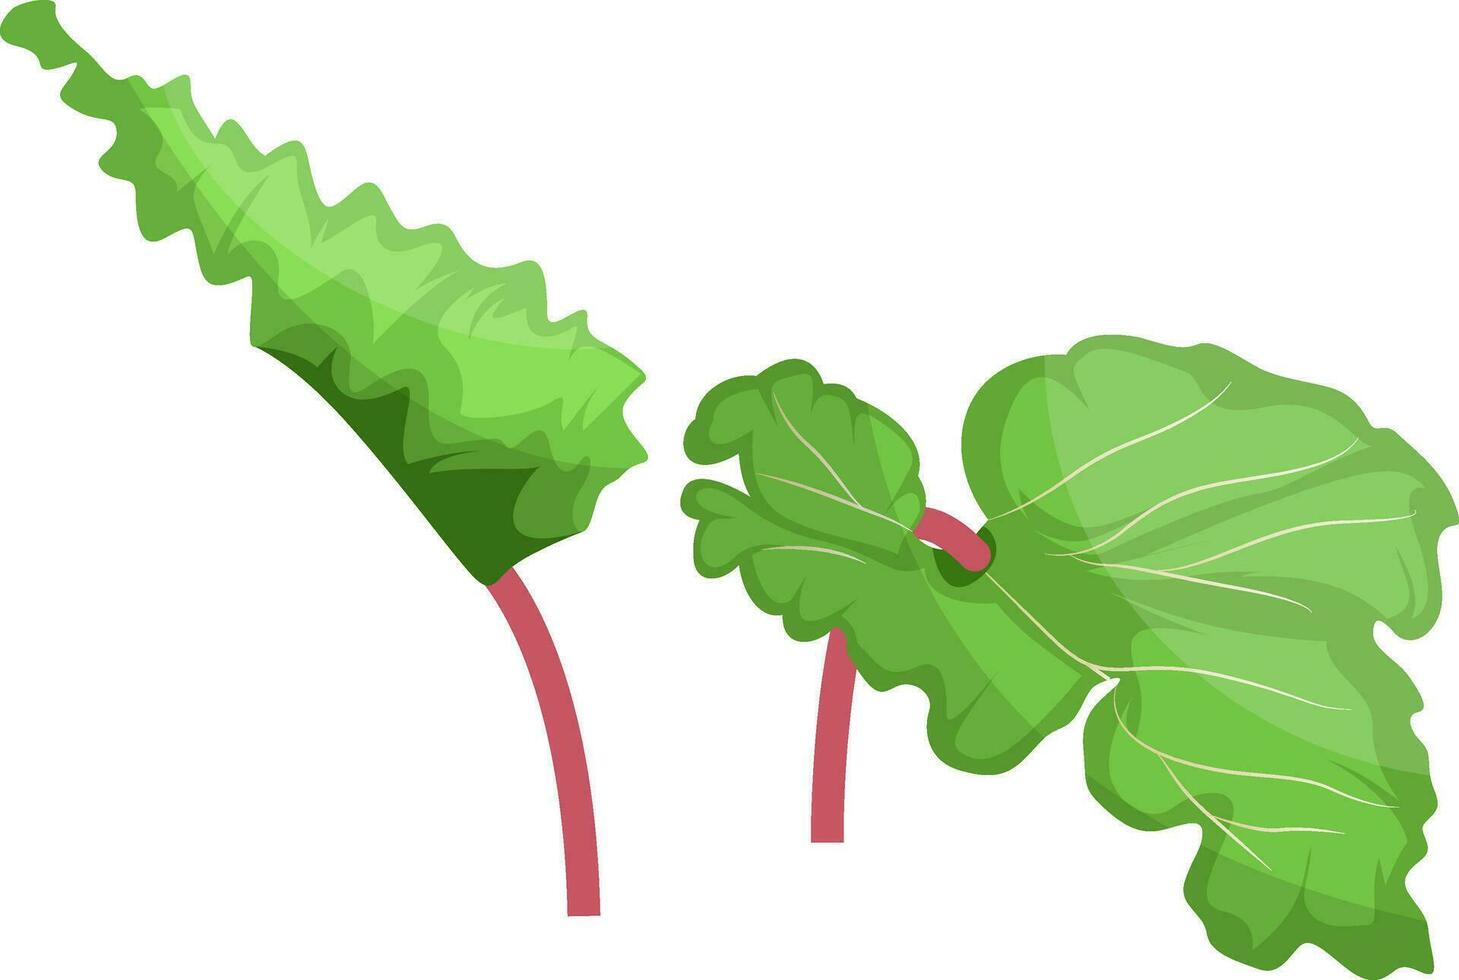 Green and pink rhubarb leafs vector illustration of vegetables on white background.